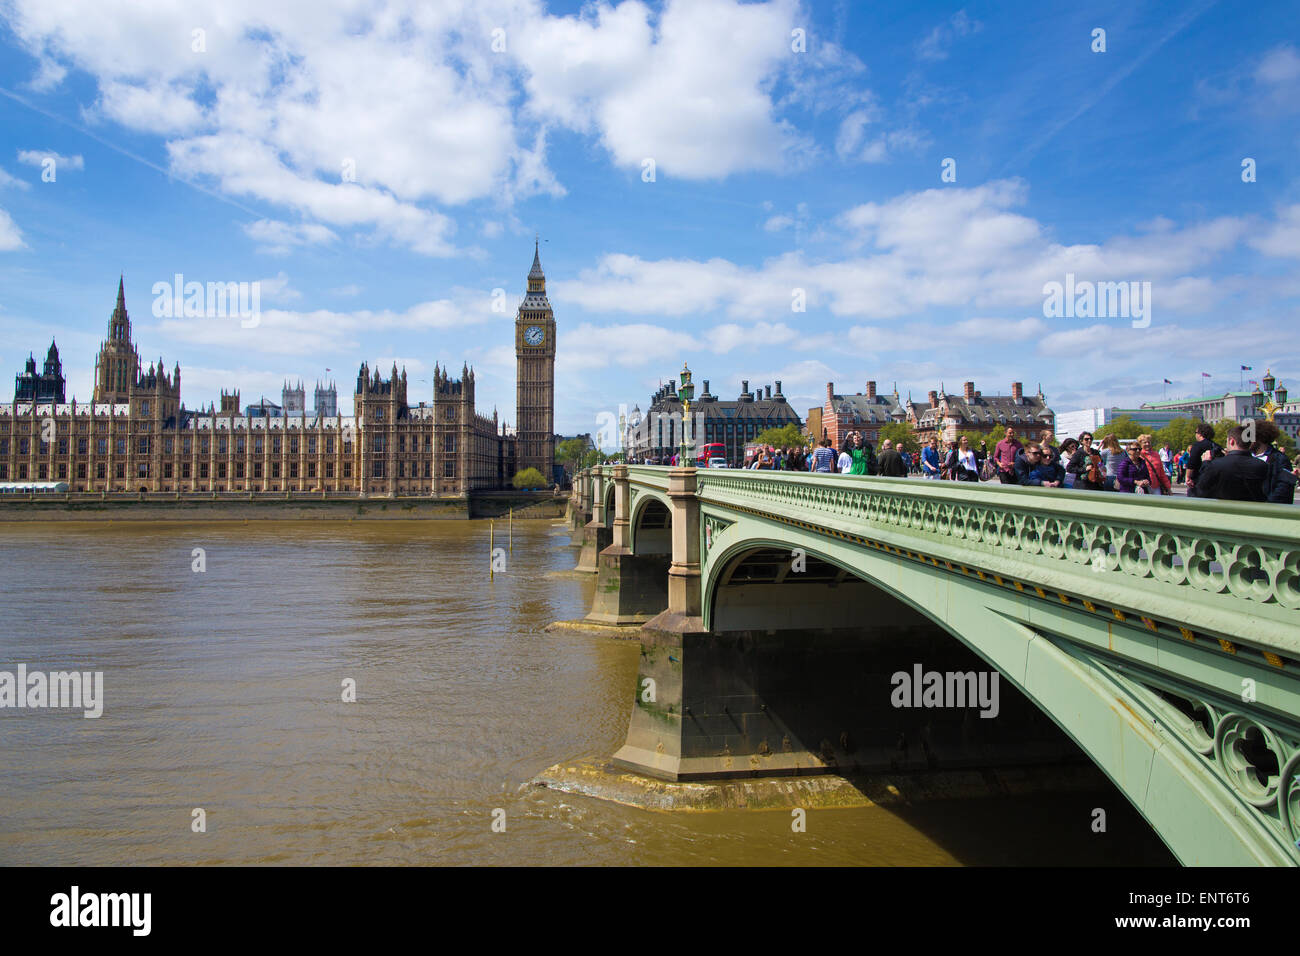 Palace of Westminster and the Elizabeth Tower, known as Big Ben, viewed from the south side of Westminster Bridge, London, UK Stock Photo